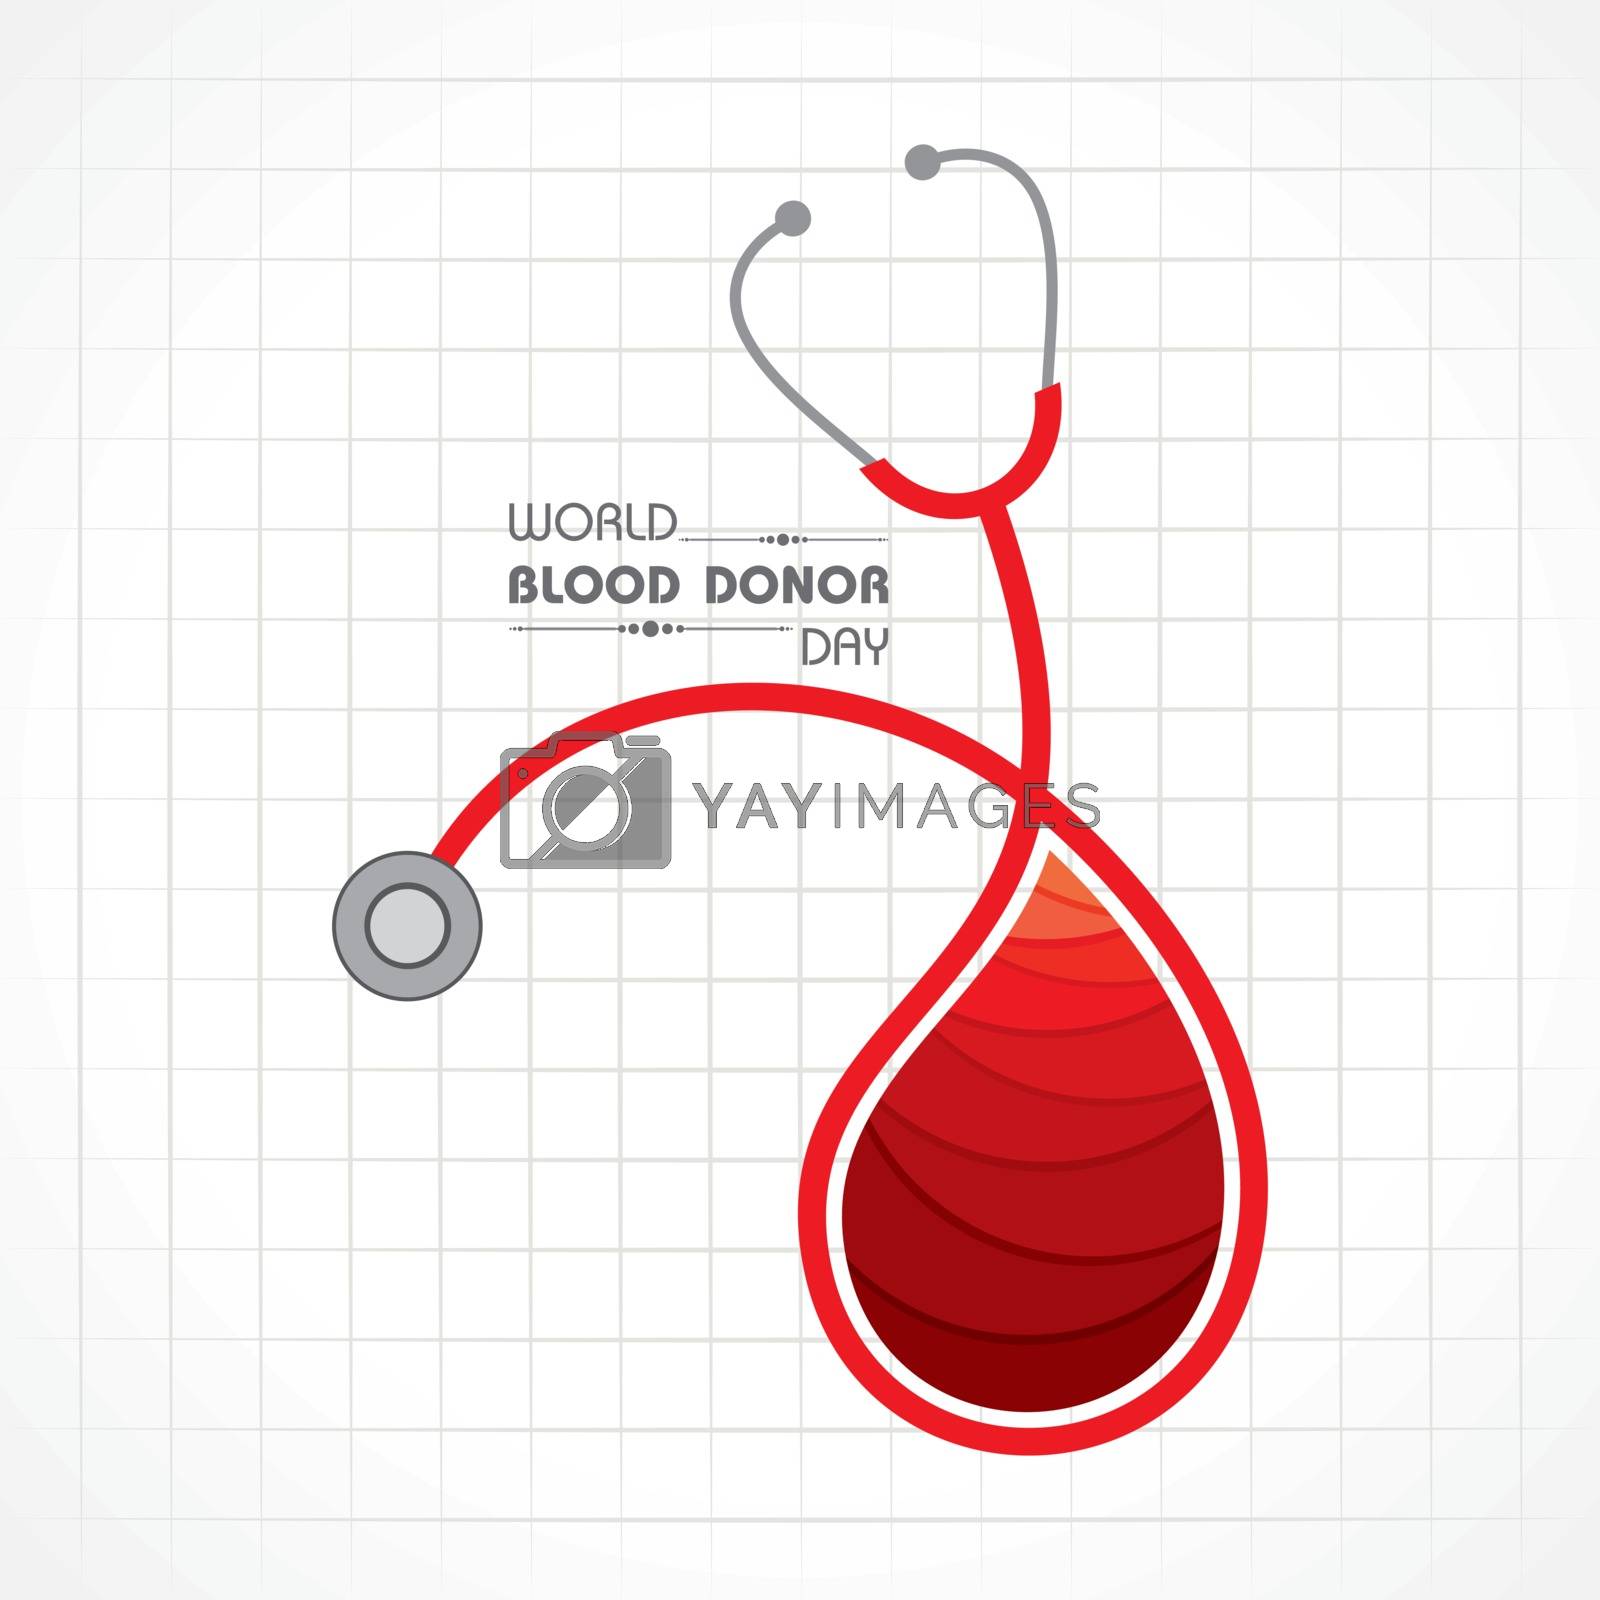 Royalty free image of World Blood Donor Day.Donate Blood Concept by graphicsdunia4you